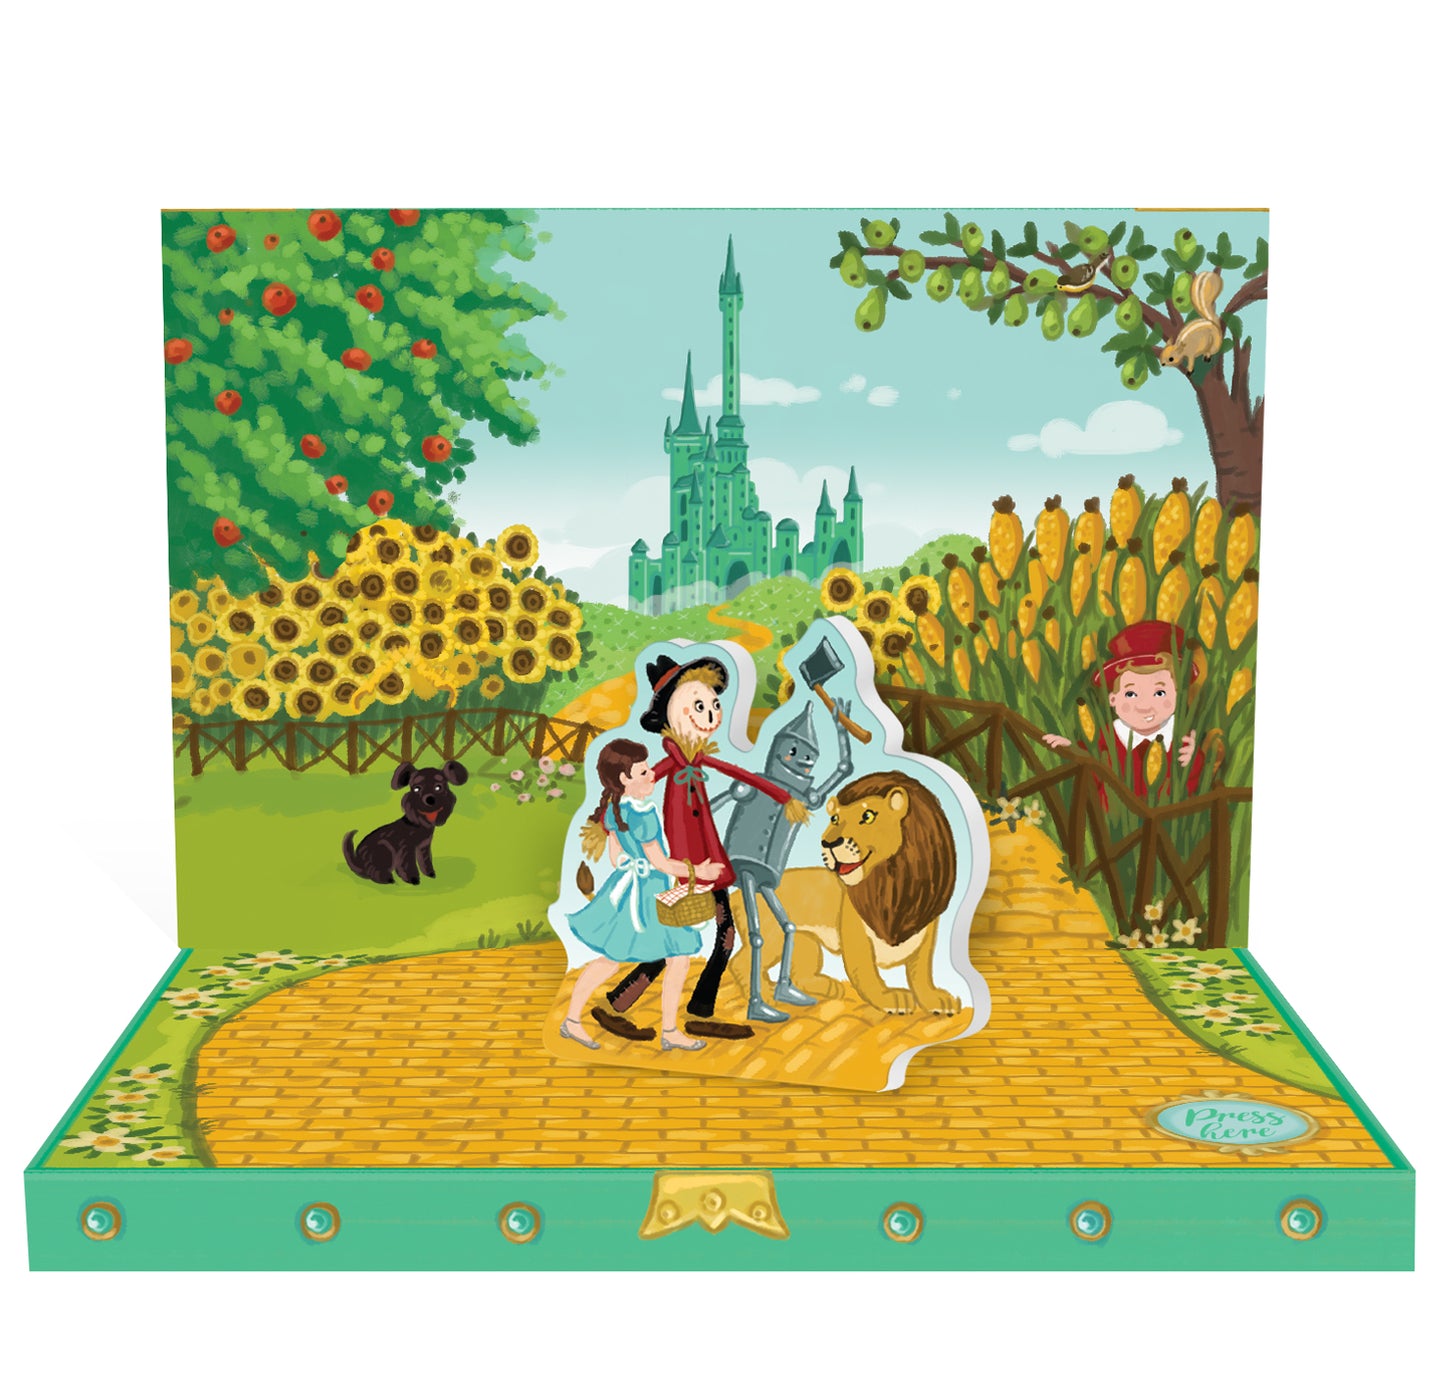 An Adventure In Oz Music Box Card Novelty Dancing Musical Greeting Card